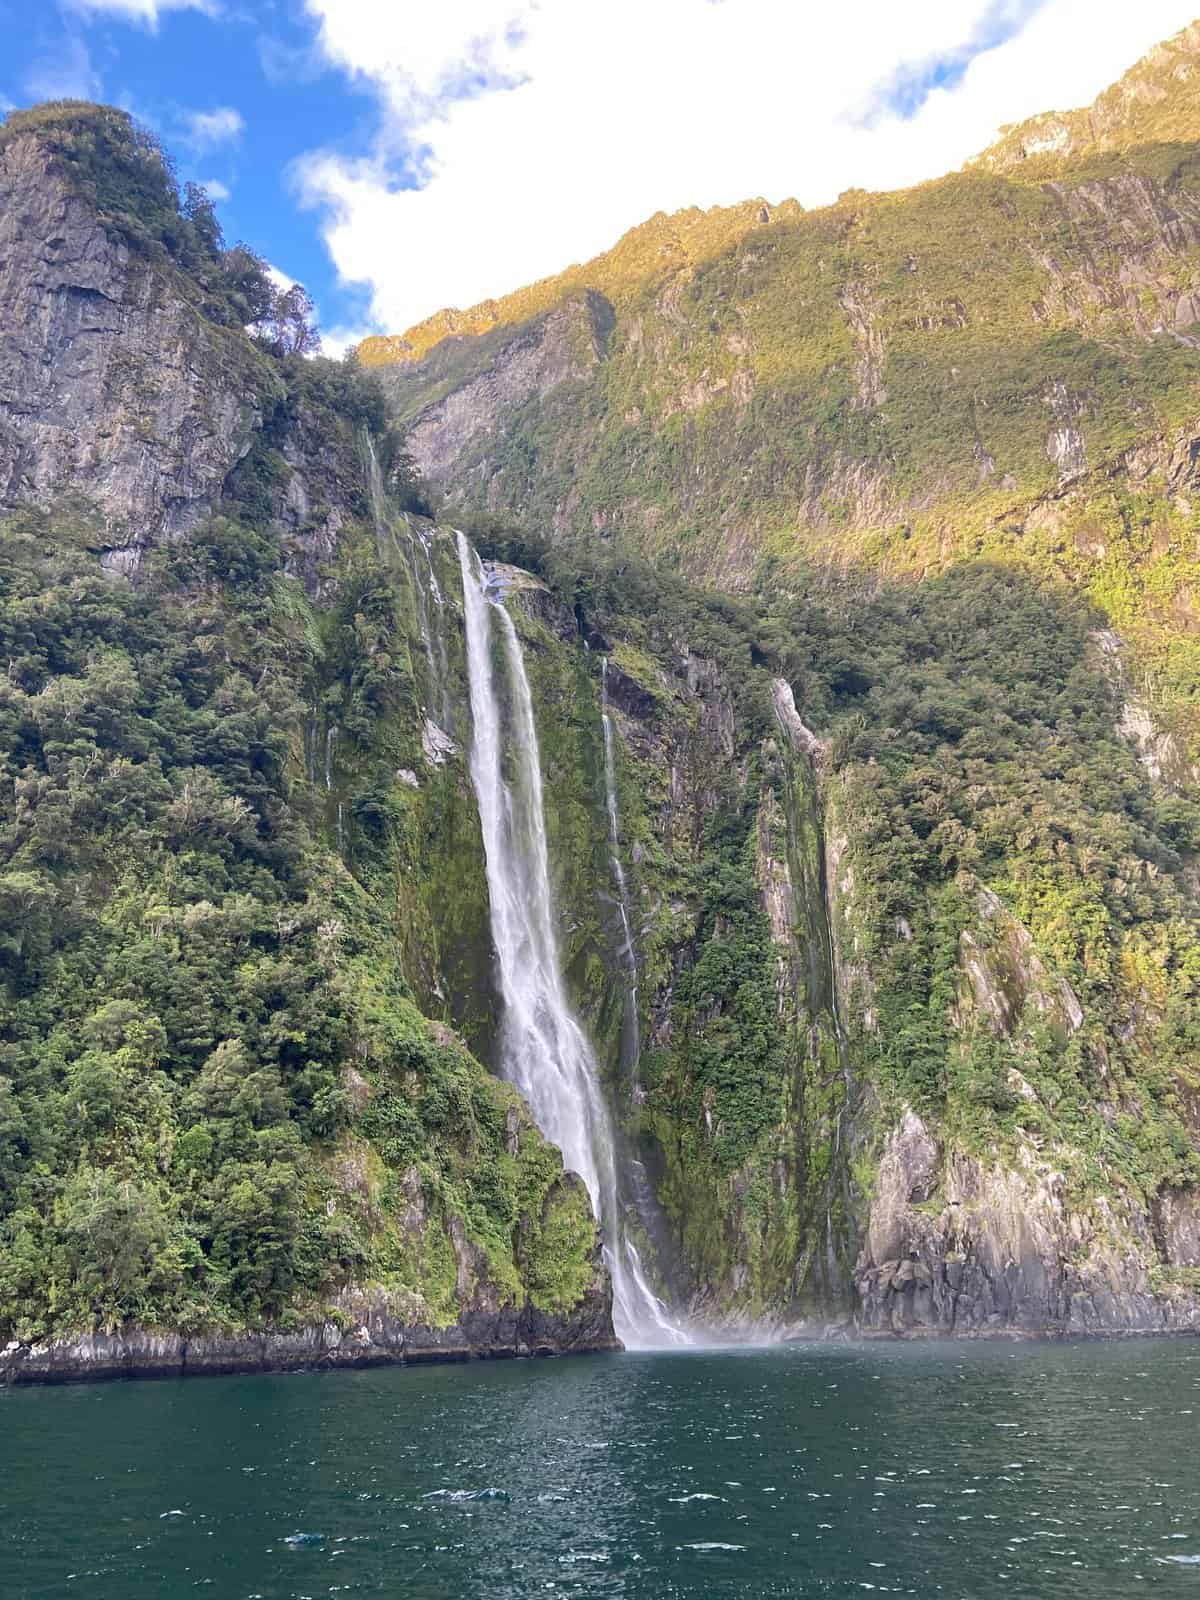 waterfalls seen on our Milford Sound cruise in New Zealand